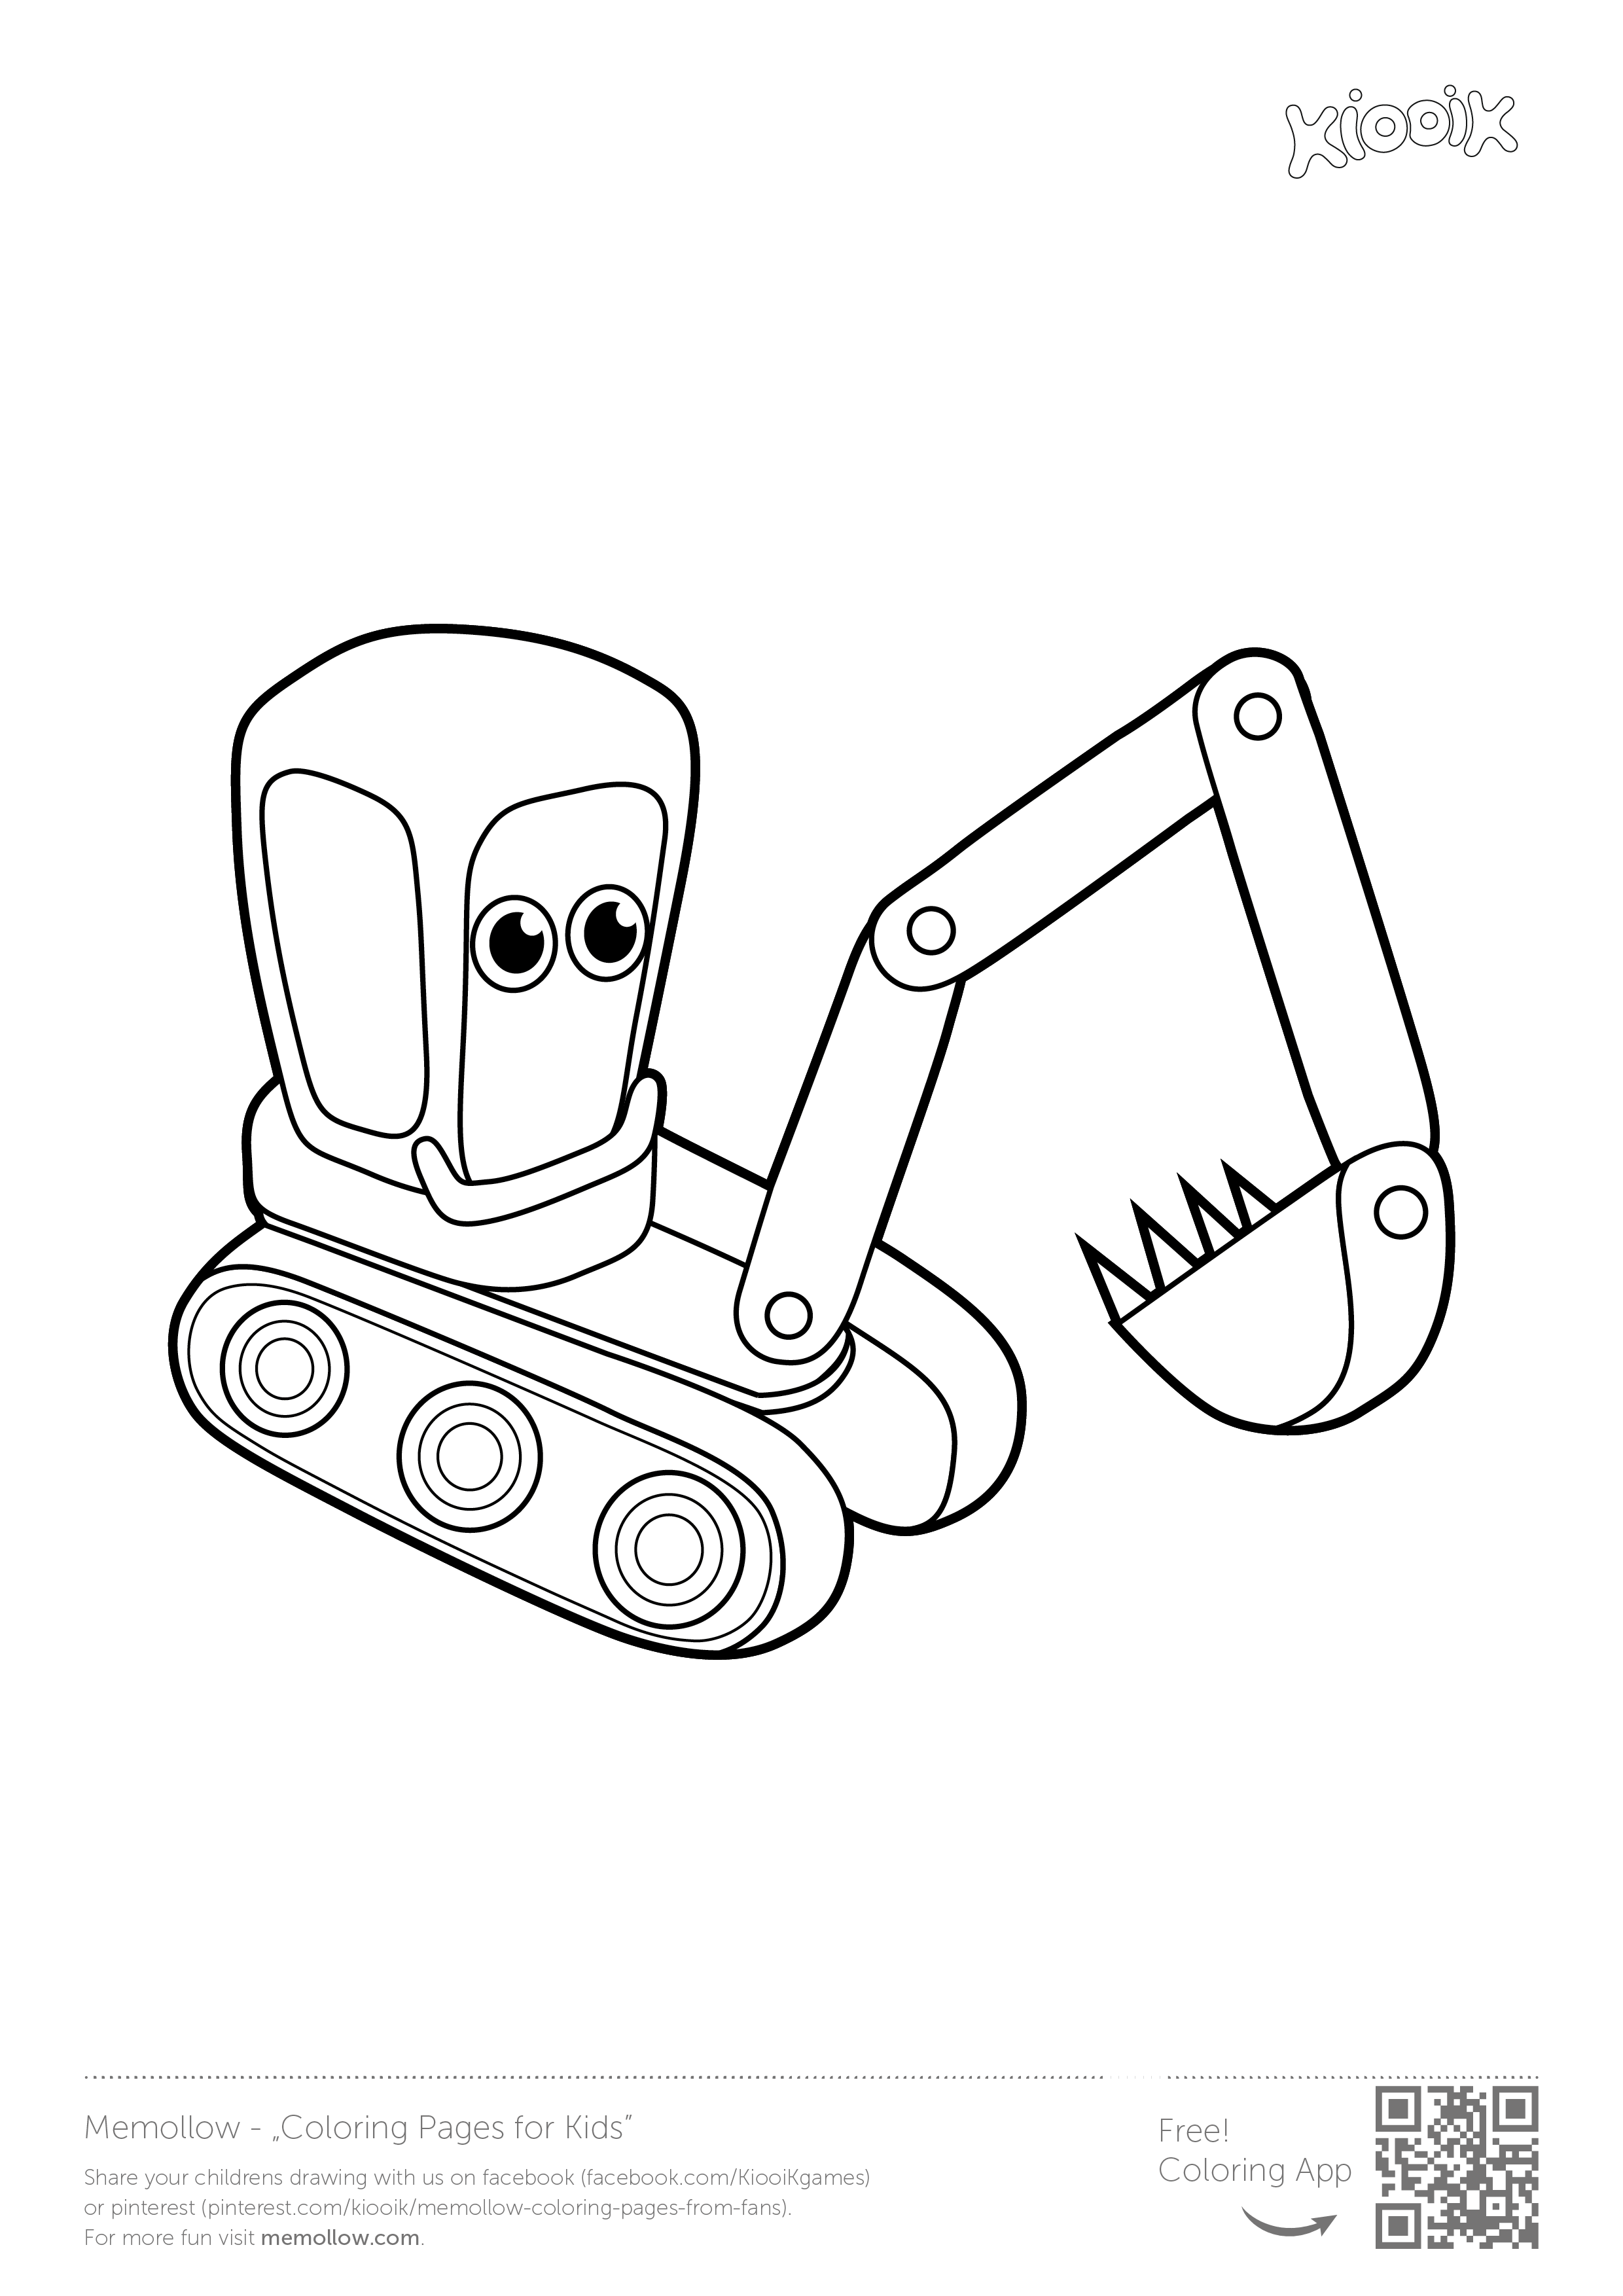 Excavator" #memollow to print #coloring pages for #kids printables ...